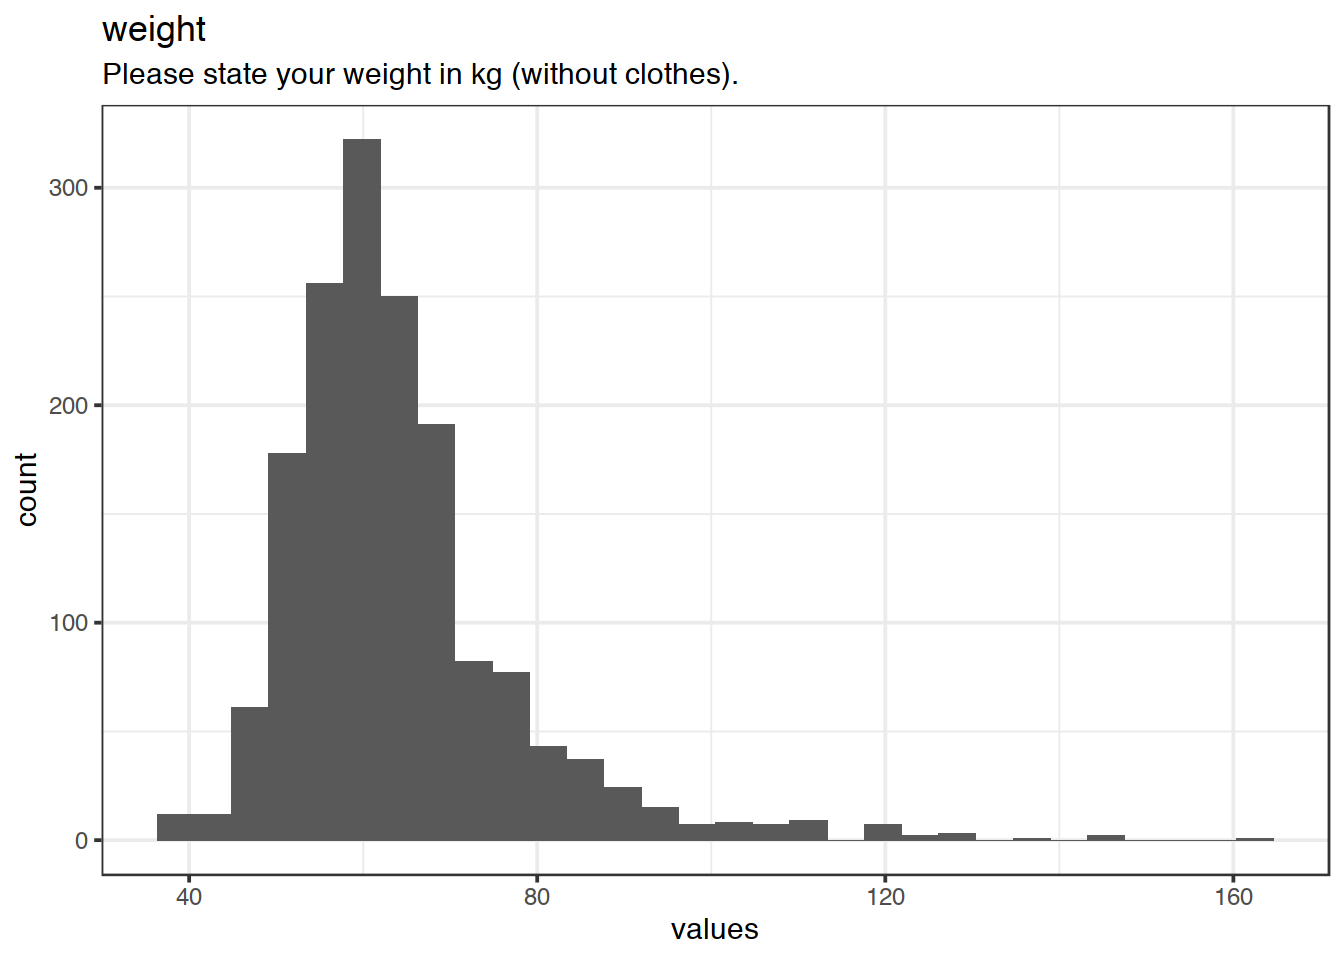 Distribution of values for weight